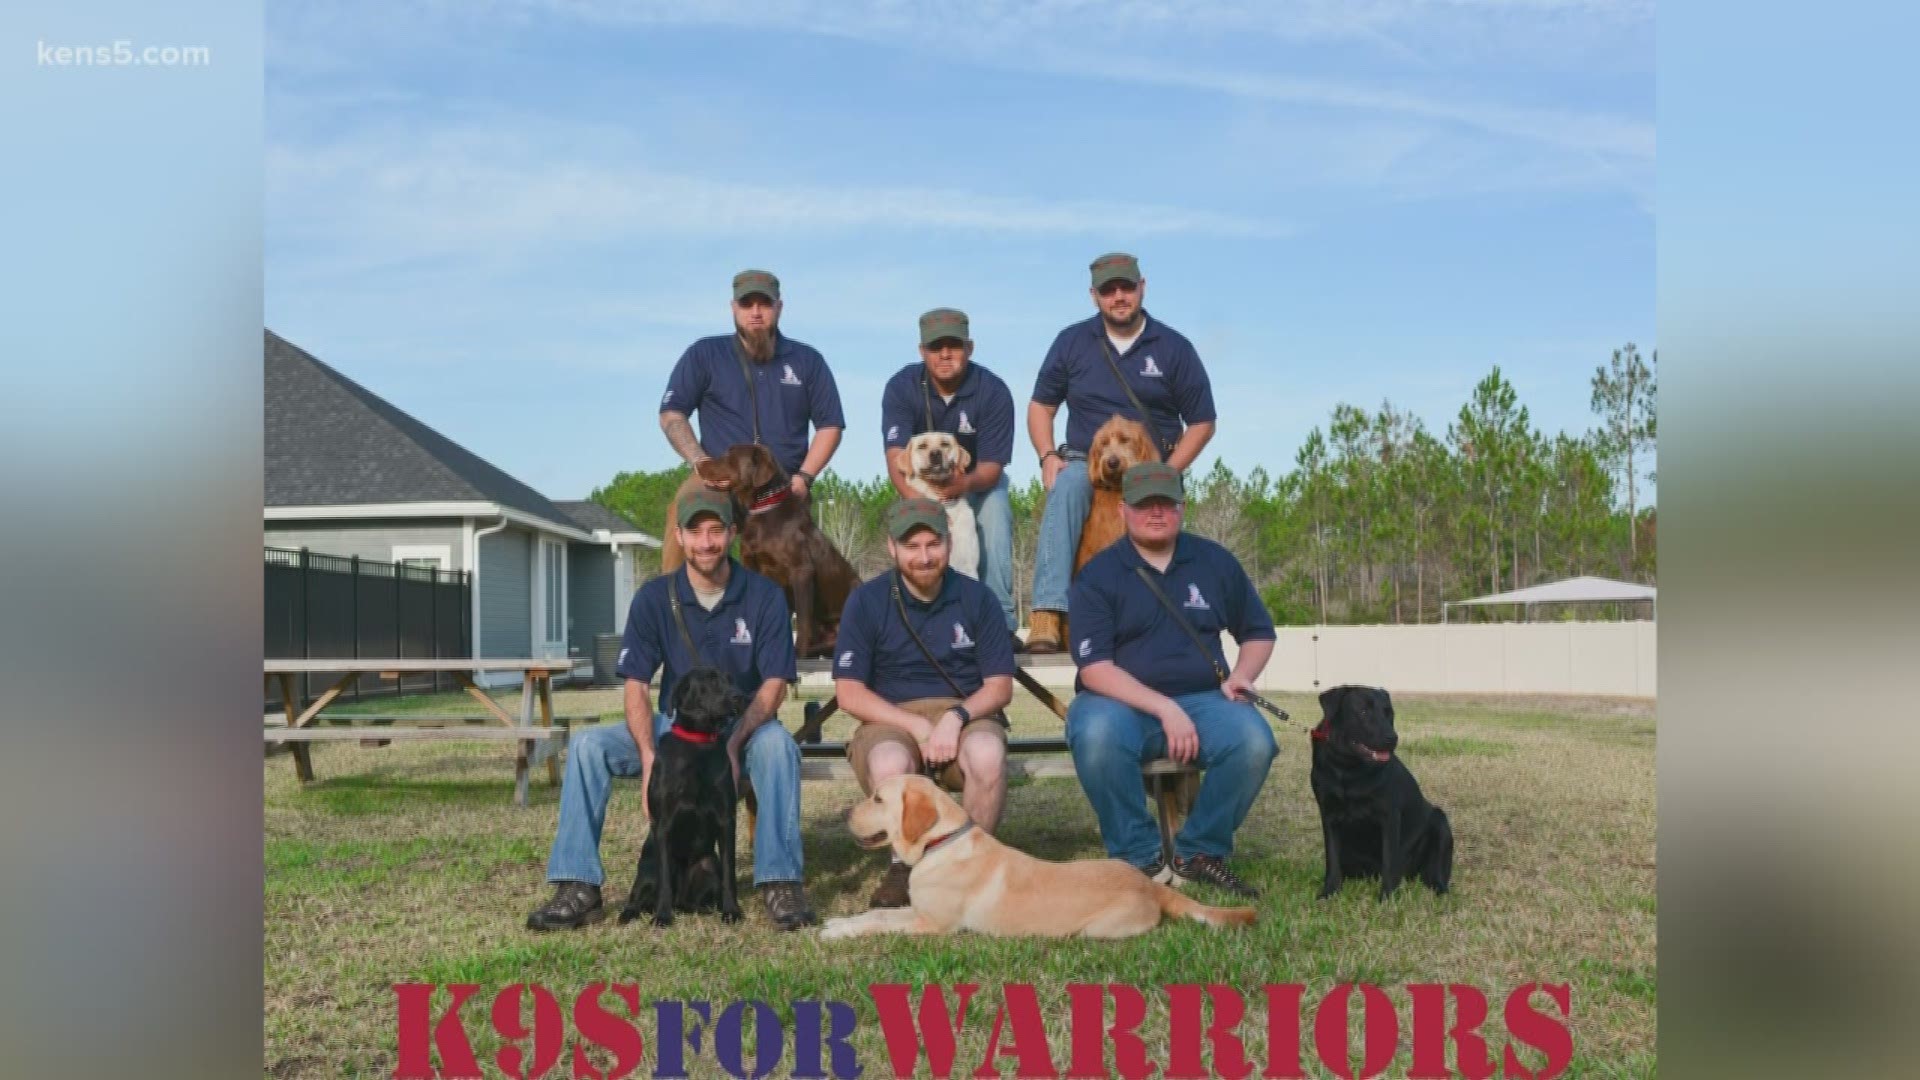 KENS Cares is supporting the K9s for Warriors organization's efforts to provide service dogs for disabled veterans.